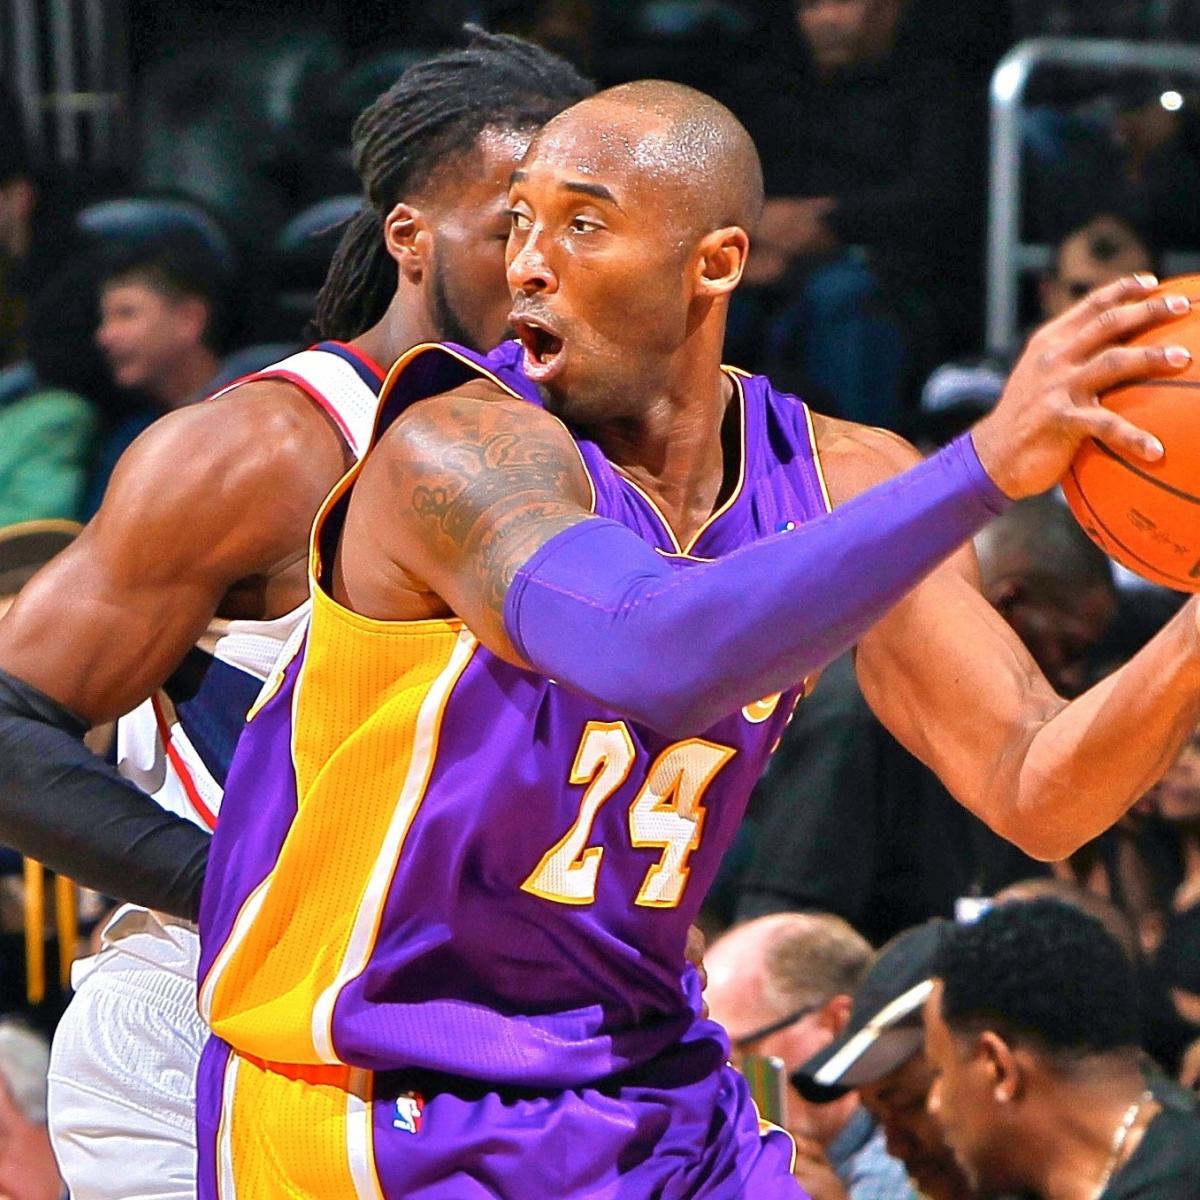 Has Kobe Bryant's Love for the Game Reached a New Zenith at Age 35? | Bleacher Report ...